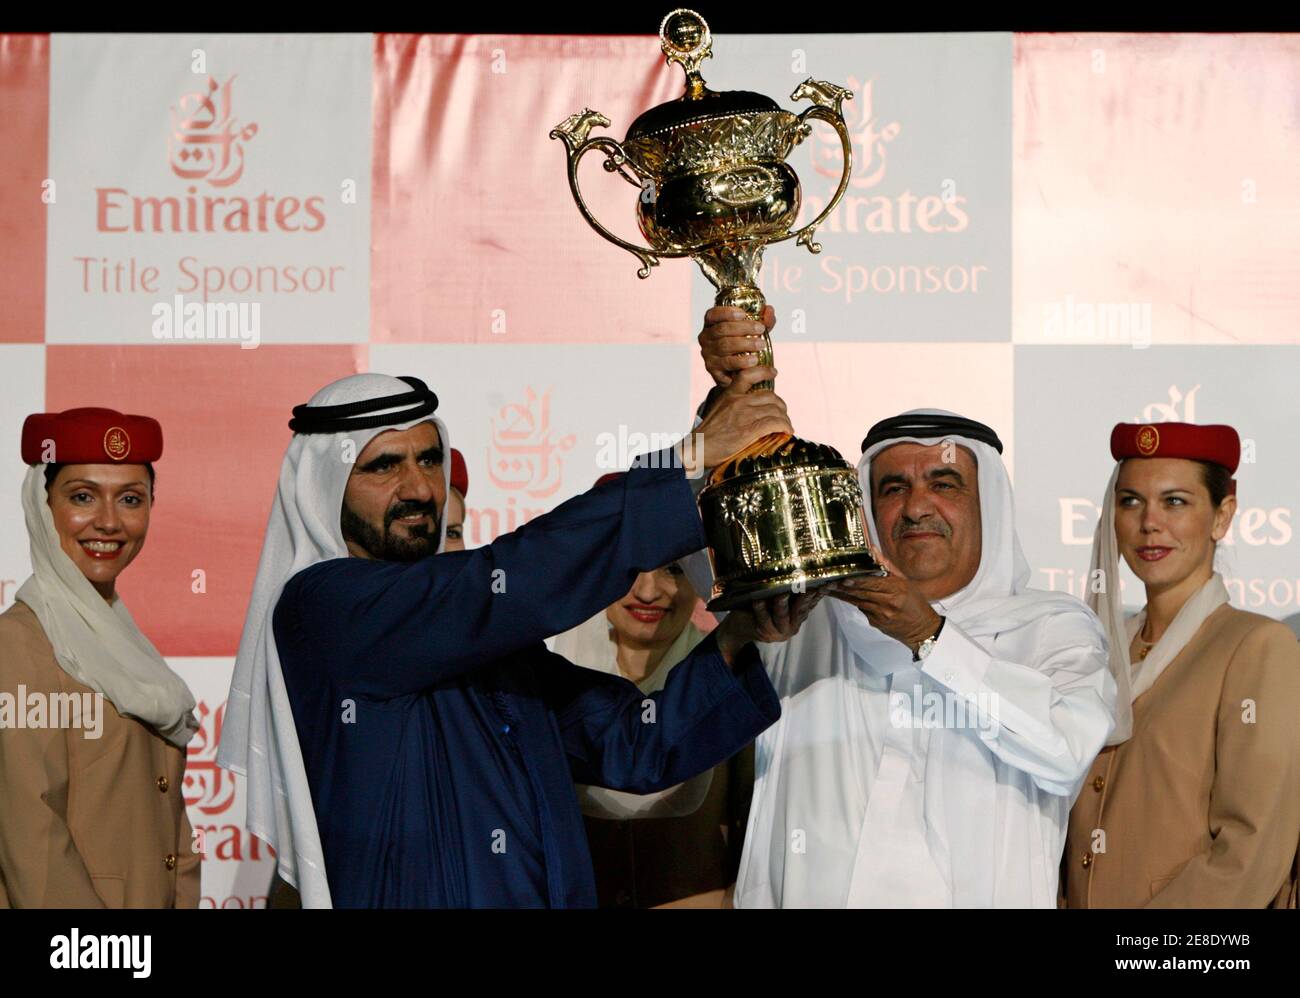 UAE Vice President and Prime Minister and Ruler of Dubai His Highness Sheikh Mohammed bin Rashid Al Maktoum (L) hands the Dubai World Cup to Sheikh Hamdan Bin Rashid Al Makhtoum after his horse Invasor won the Dubai World Cup March 31, 2007. The Dubai World Cup, with a cash prize of $6 million, is horse racing's richest prize.  REUTERS/Caren Firouz   (UNITED ARAB EMIRATES) Stock Photo